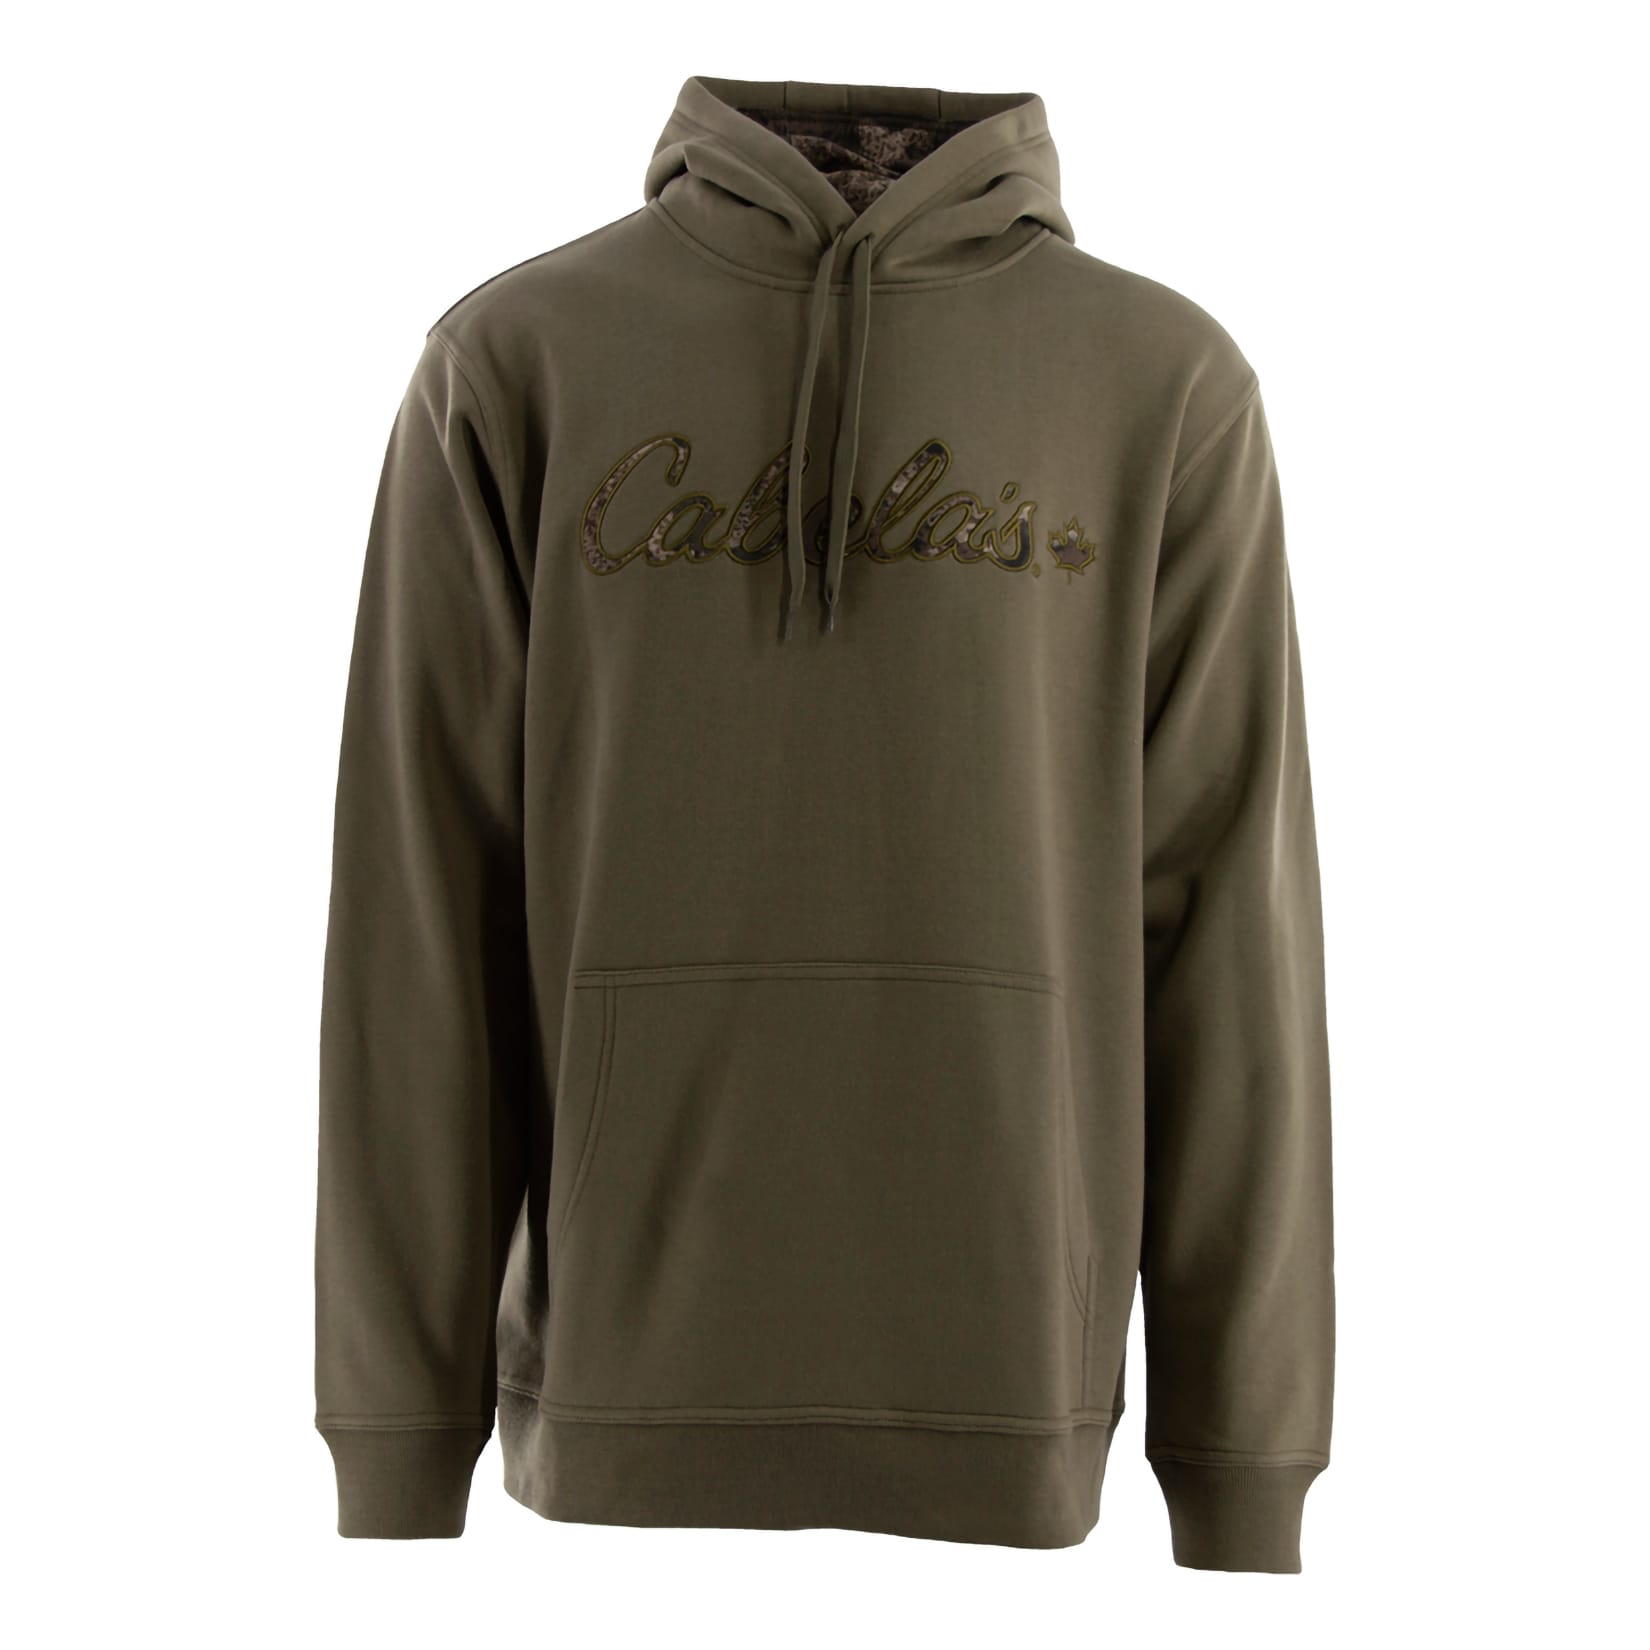 Cabela’s Canada Men’s Game Day Long-Sleeve Hoodie - Dusky Green